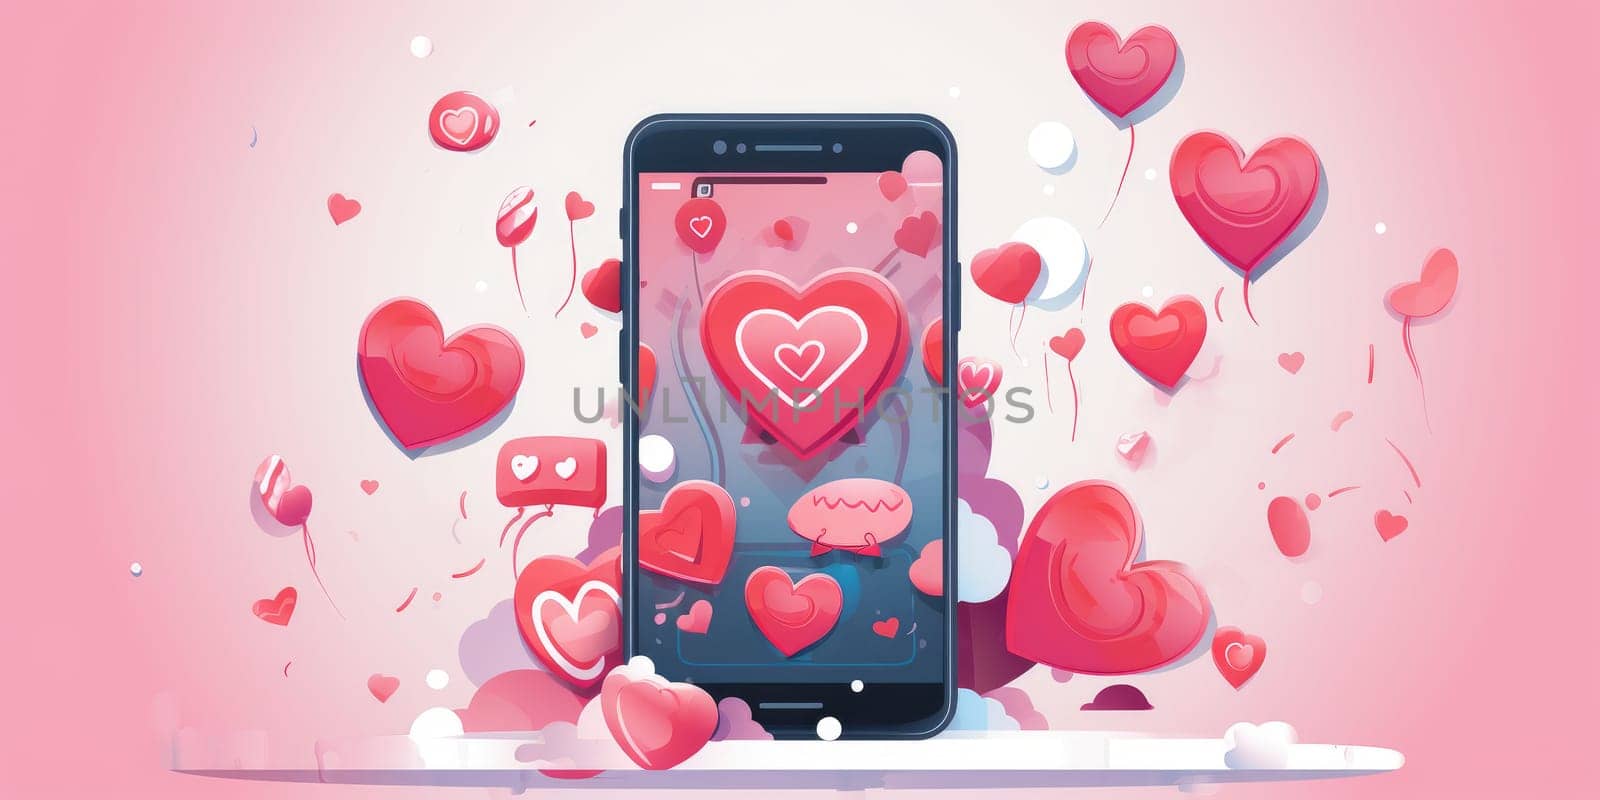 Smartphone or mobile with heart love icons around, technology concept by Kadula